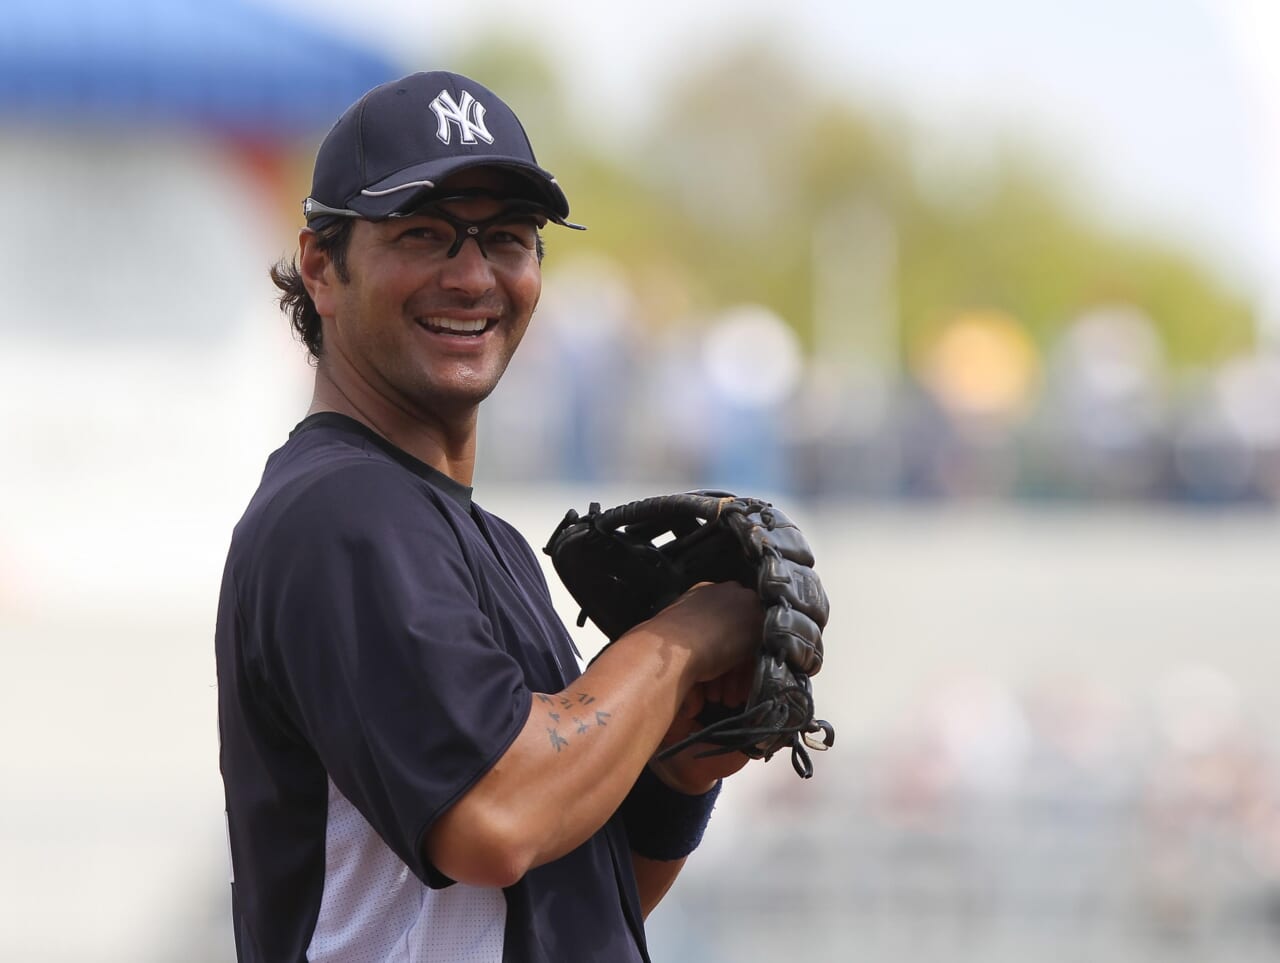 New York Yankees: Coaching staff brings old and new expertise to the Yankees